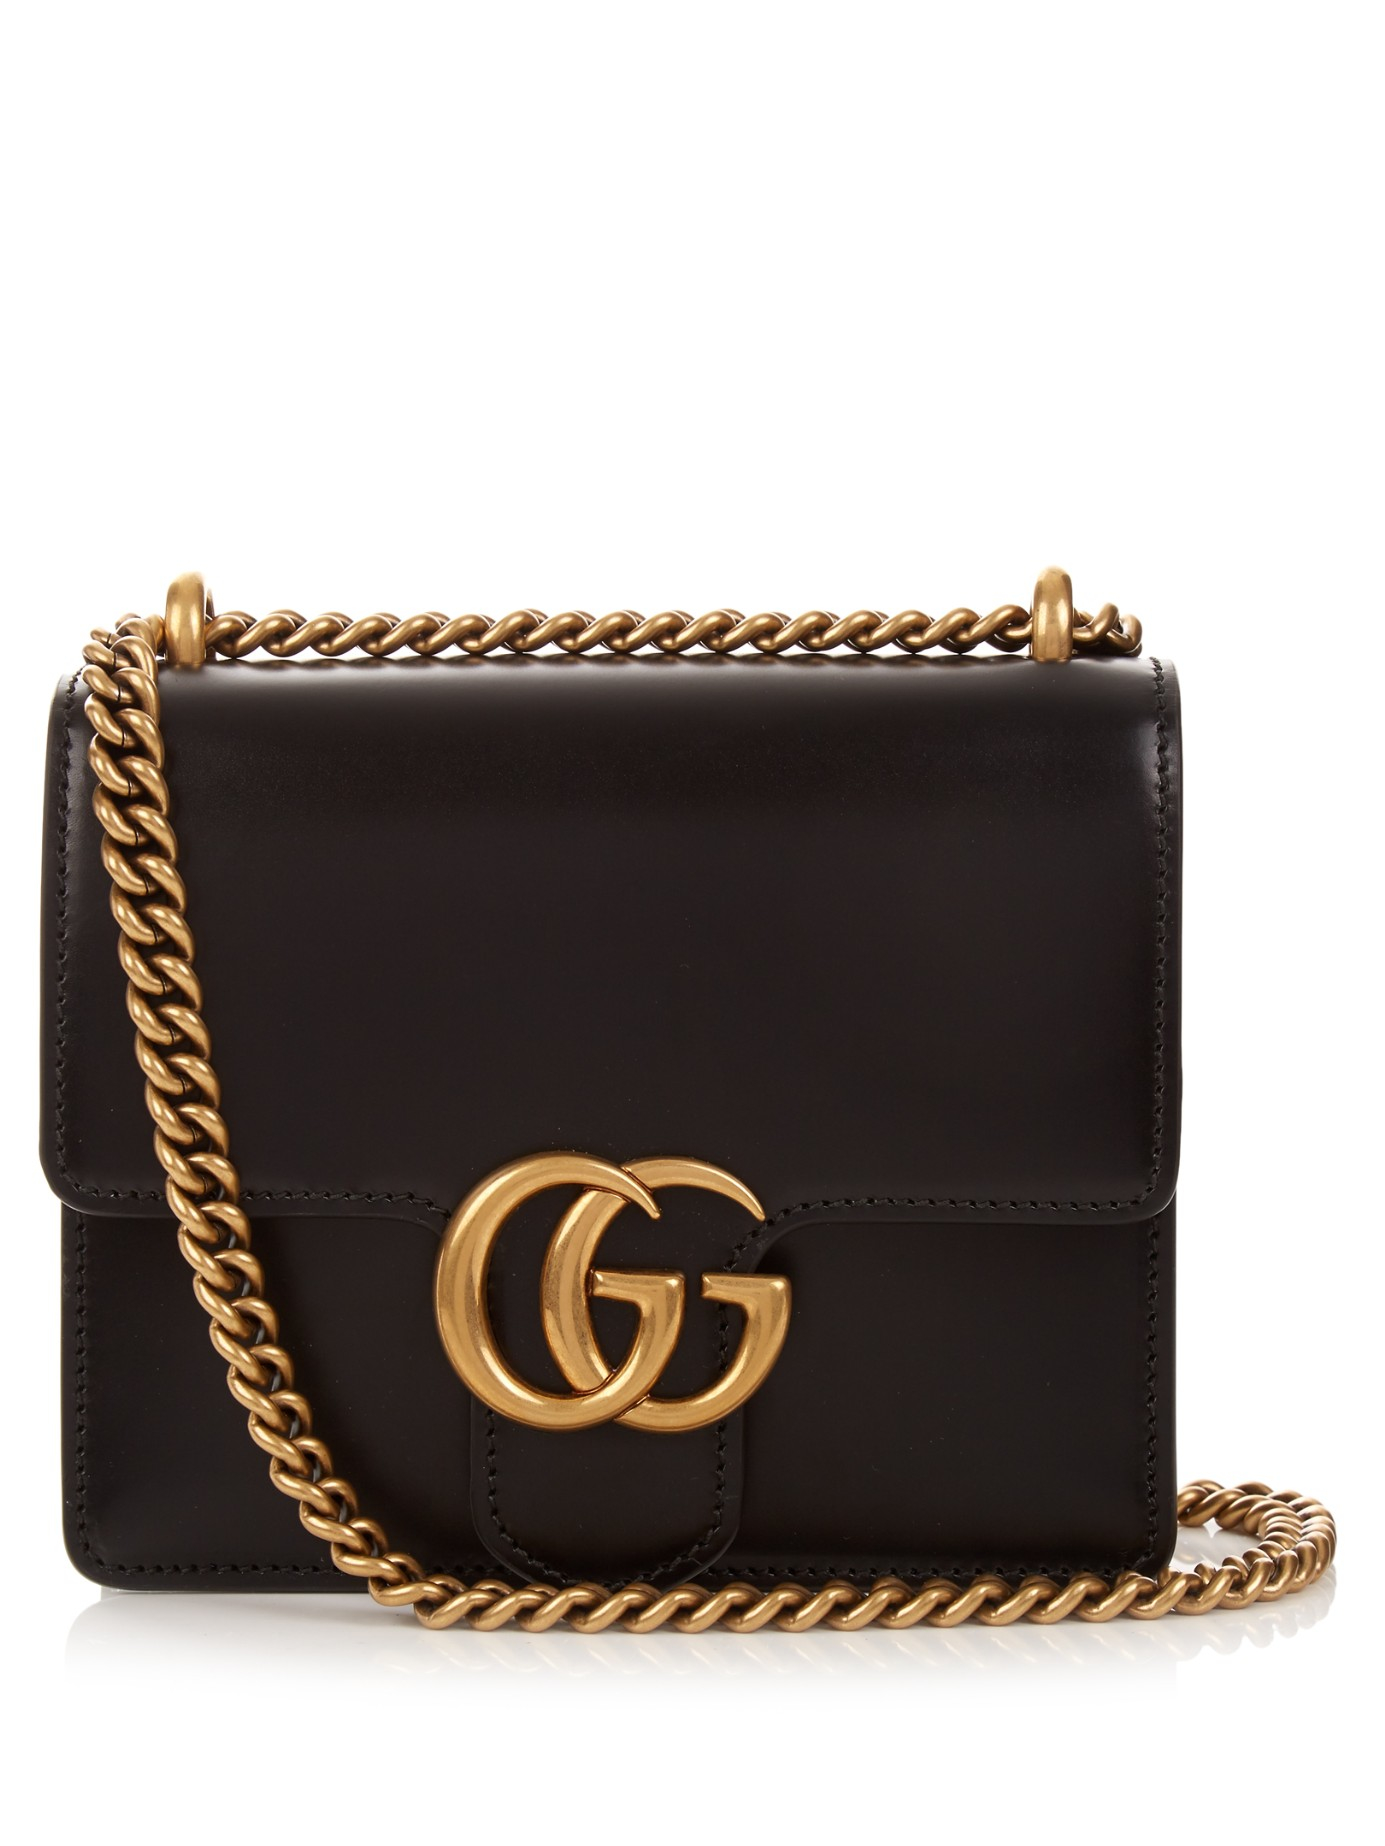 Lyst - Gucci Gg Marmont Leather Cross-body Bag in Black